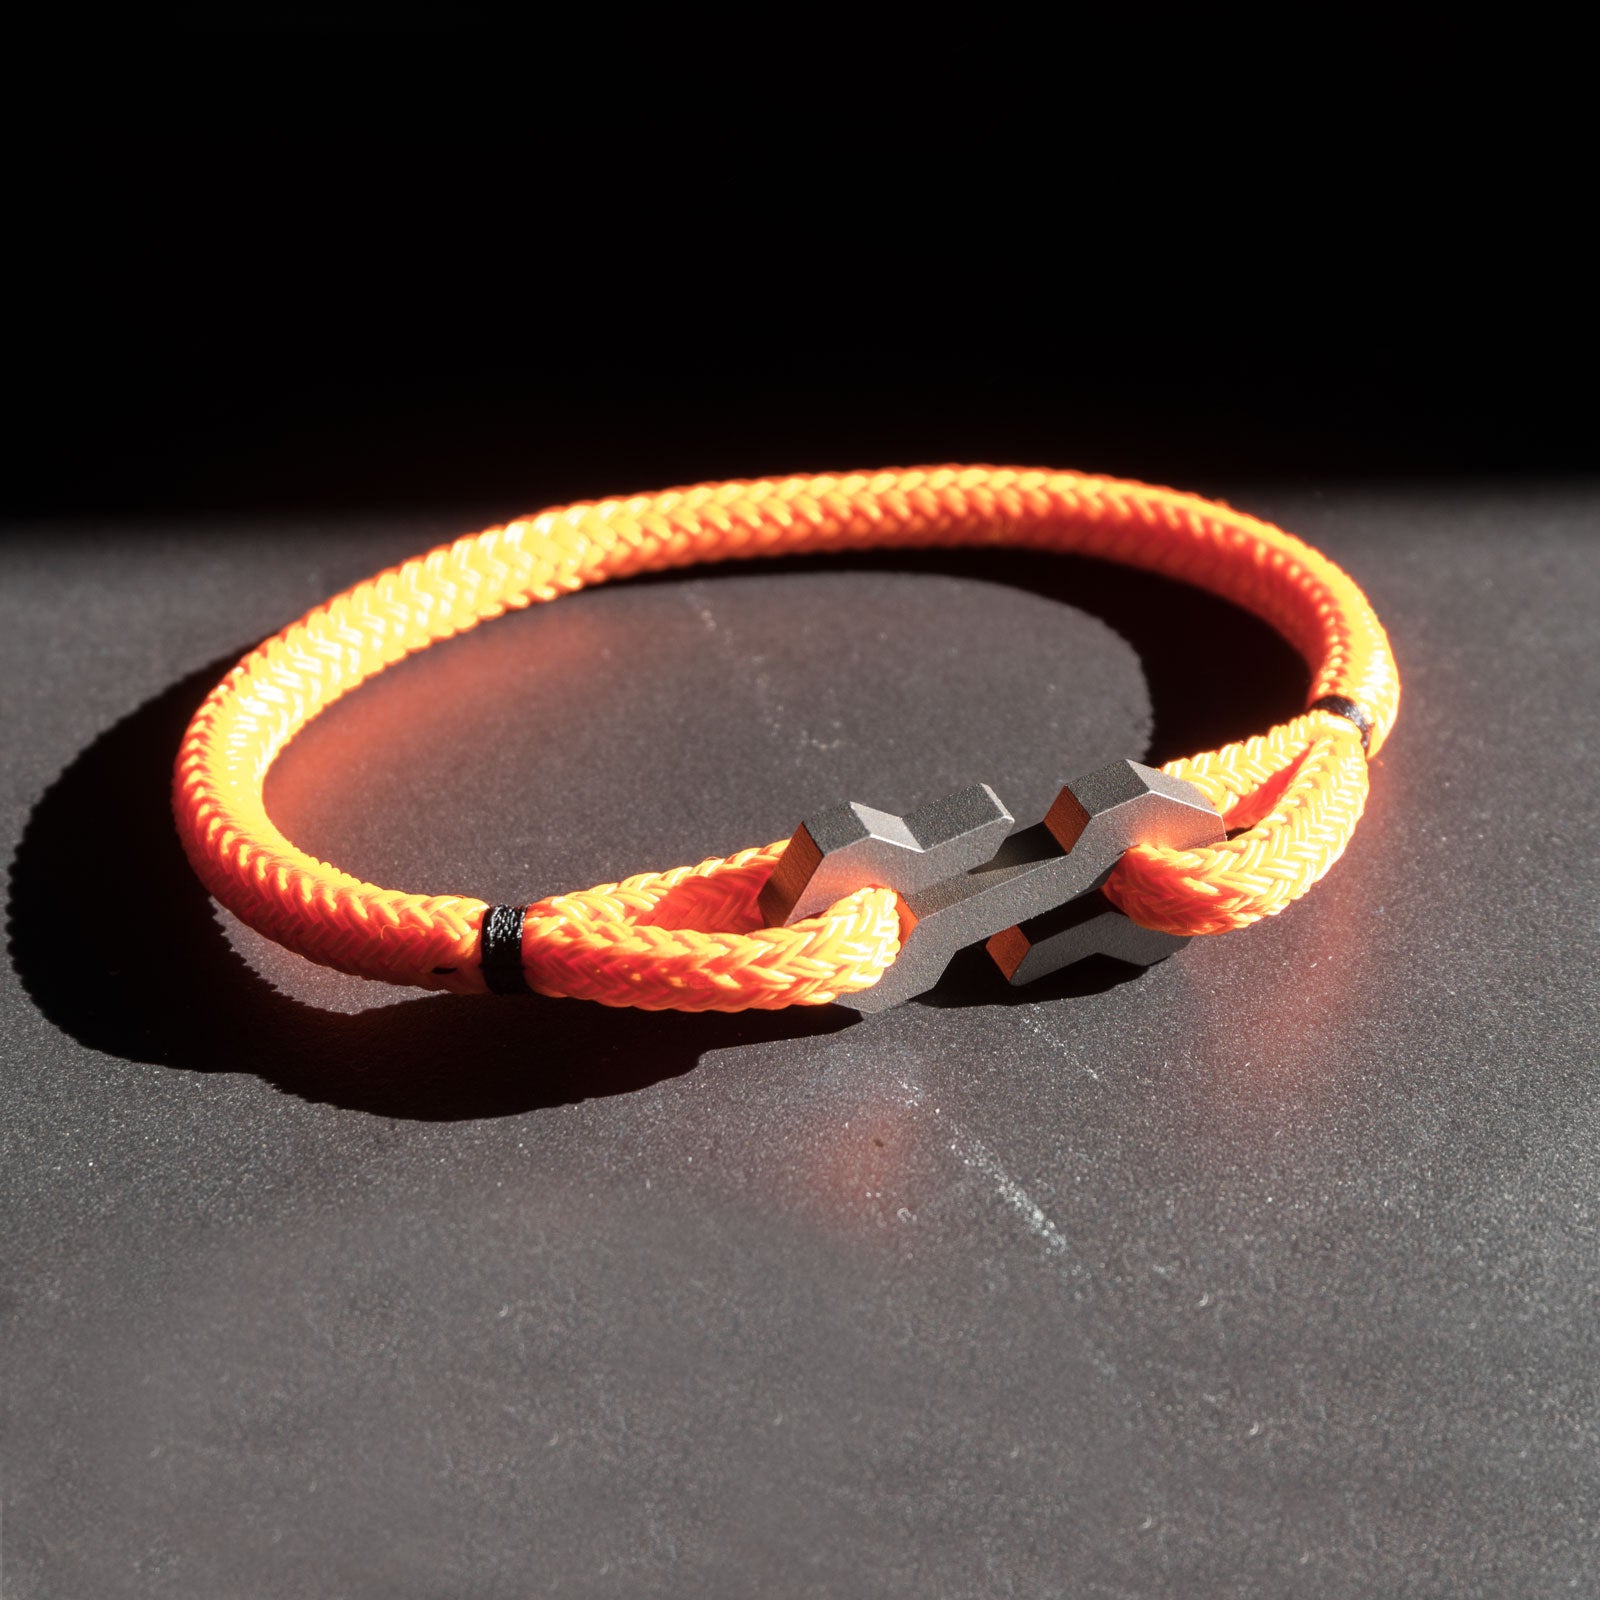 The Type S is a minimalist and timeless rope bracelet, handmade from grade 5 titanium and a nearly indestructible rope. The clasp takes cues from the traditional s-hook clasp, with sharper lines and angles. The Type S securely ties and holds the rope, making it a very secure and comfortable fit on the wrist. The radiant color of the rope perfectly matches the subdued tones of the titanium.